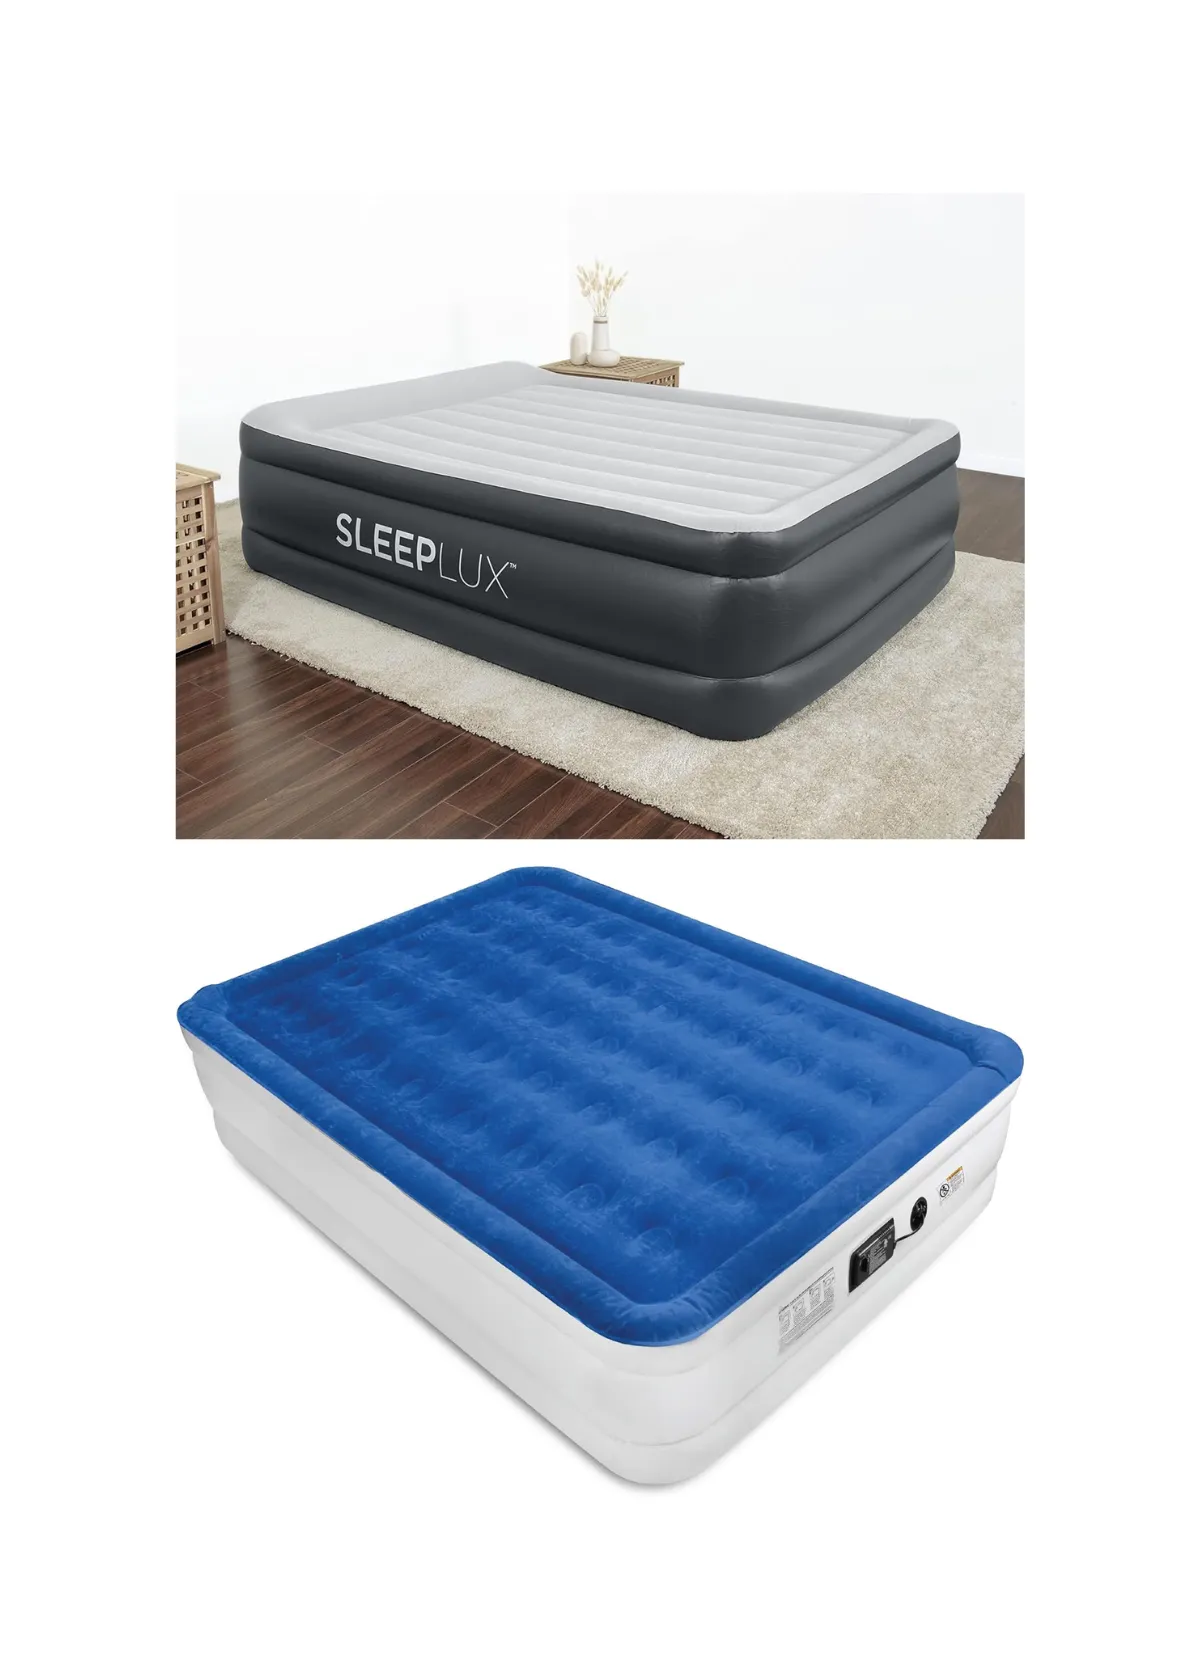 “Blow Up Mattress: The Top 5 Best-Selling Models”